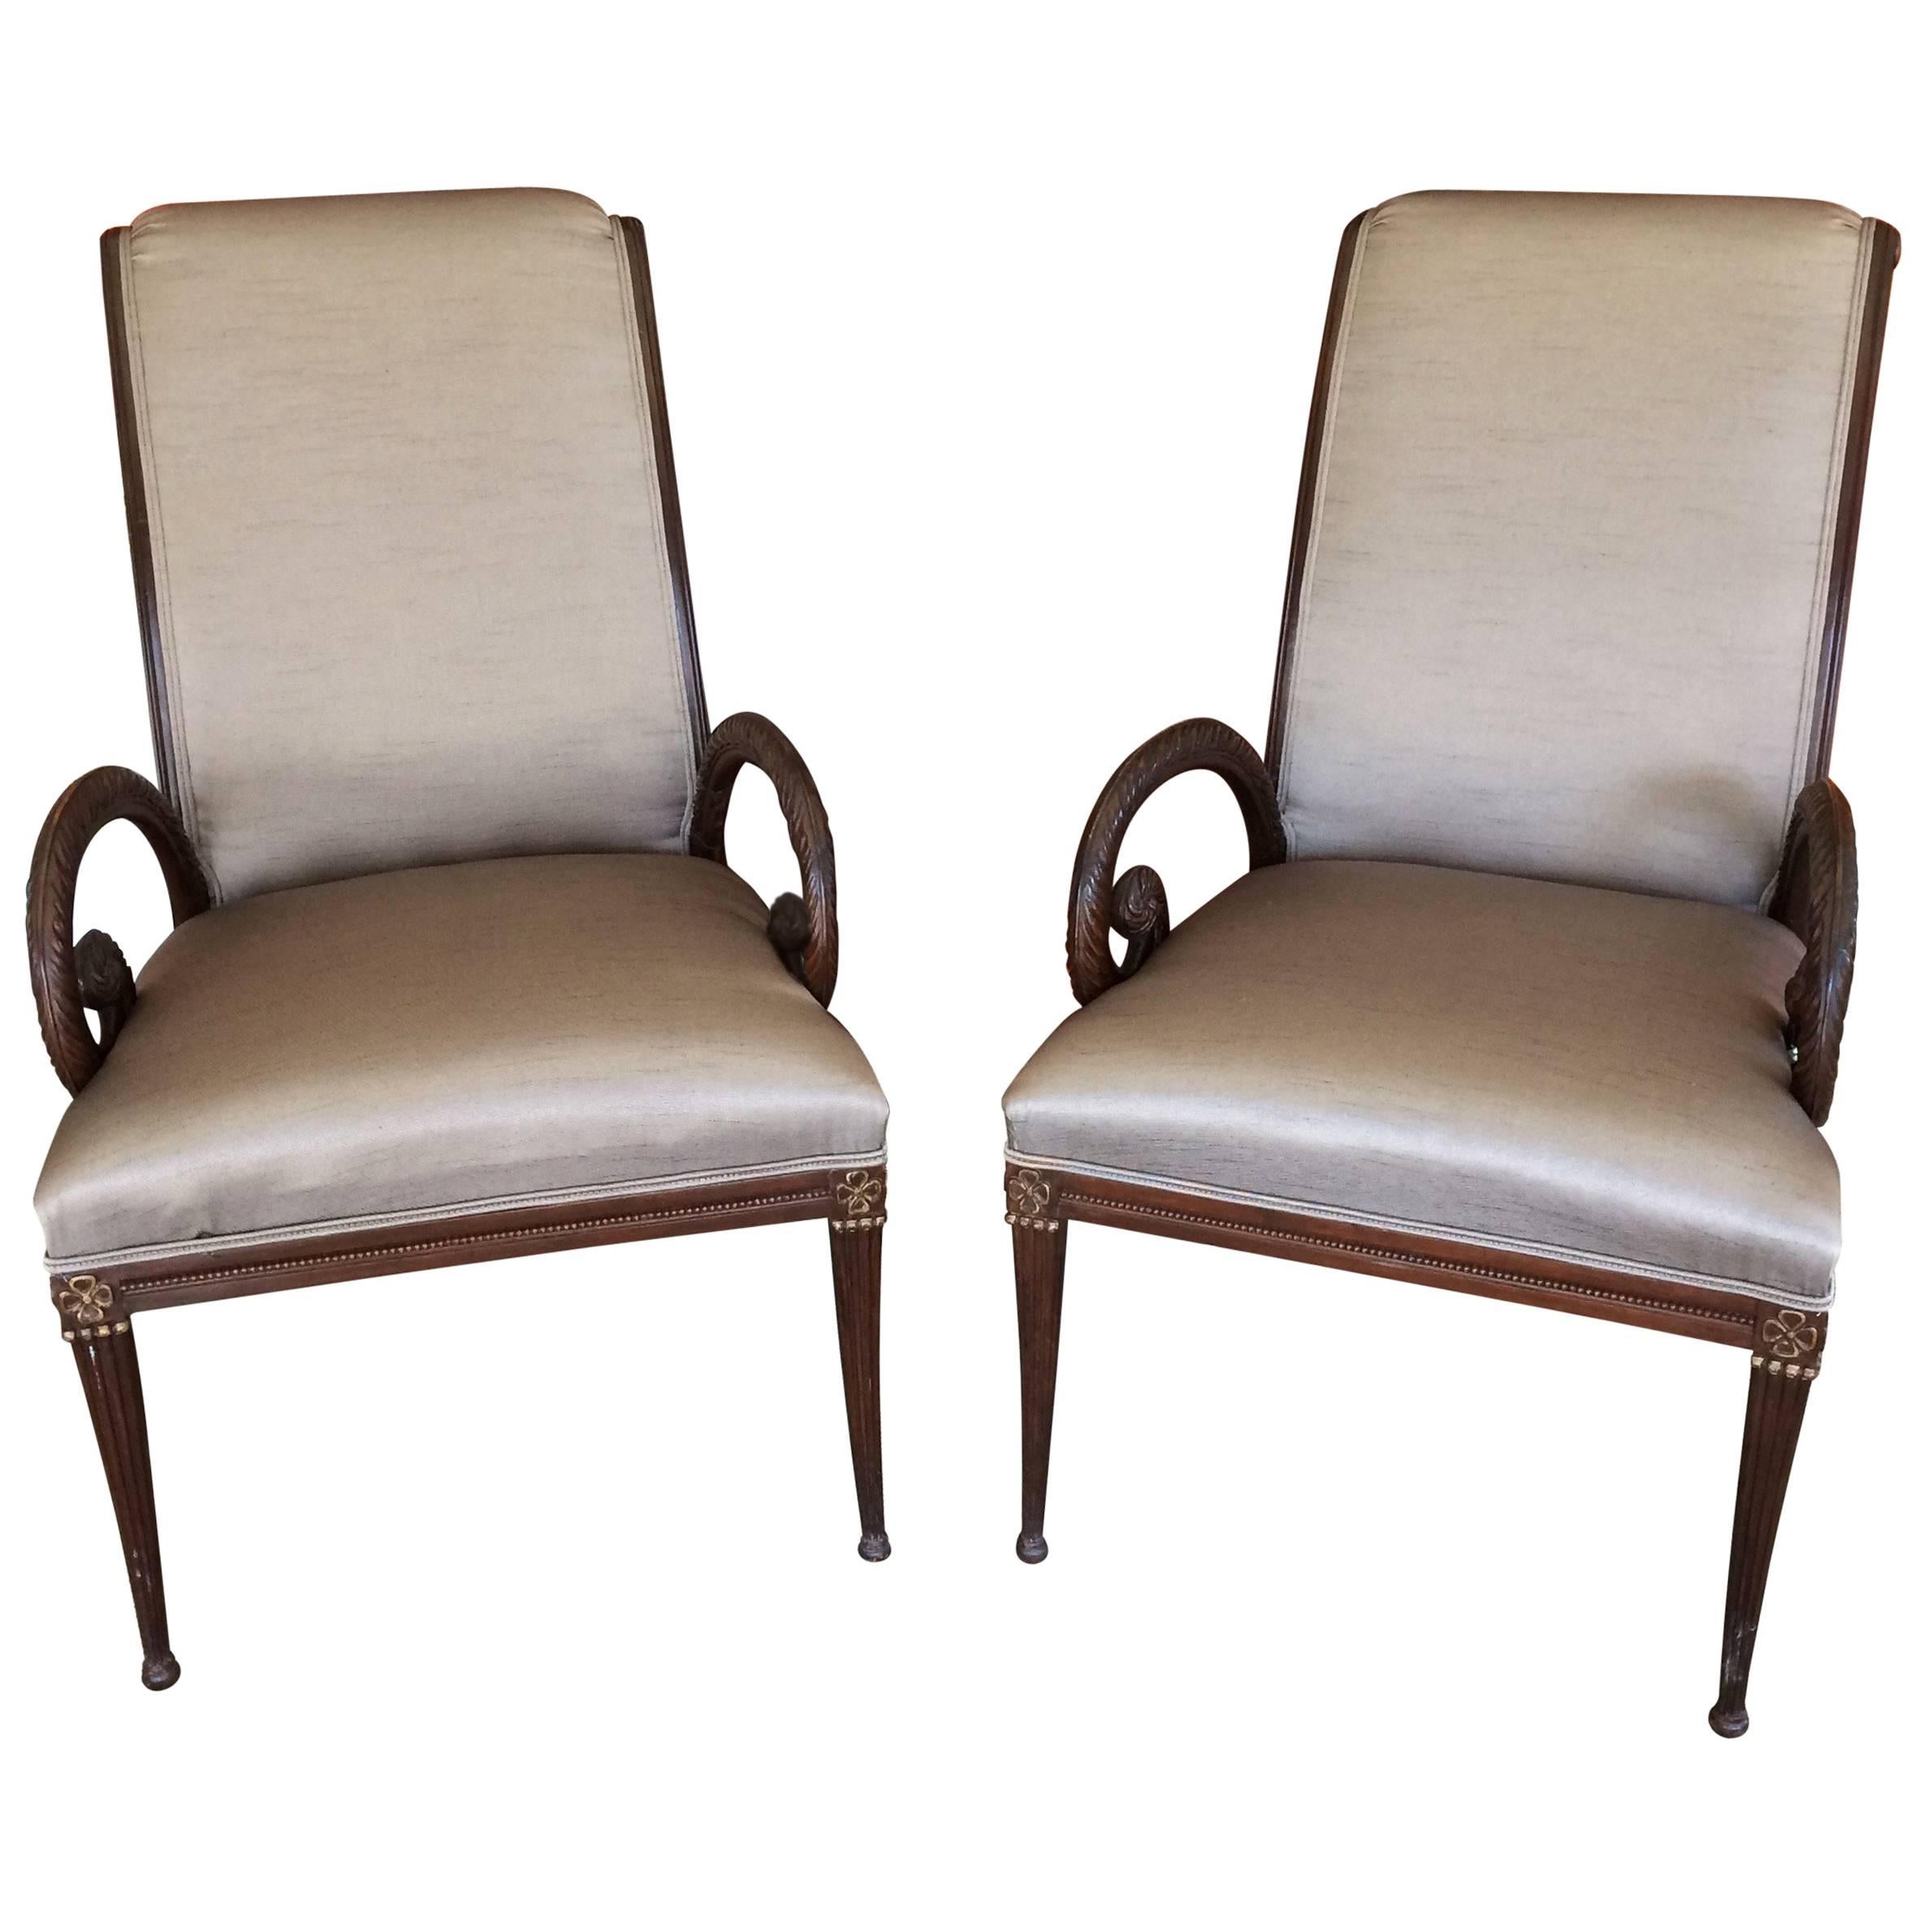 Pair of Gorgeous Carved Walnut and Upholstered Armchairs